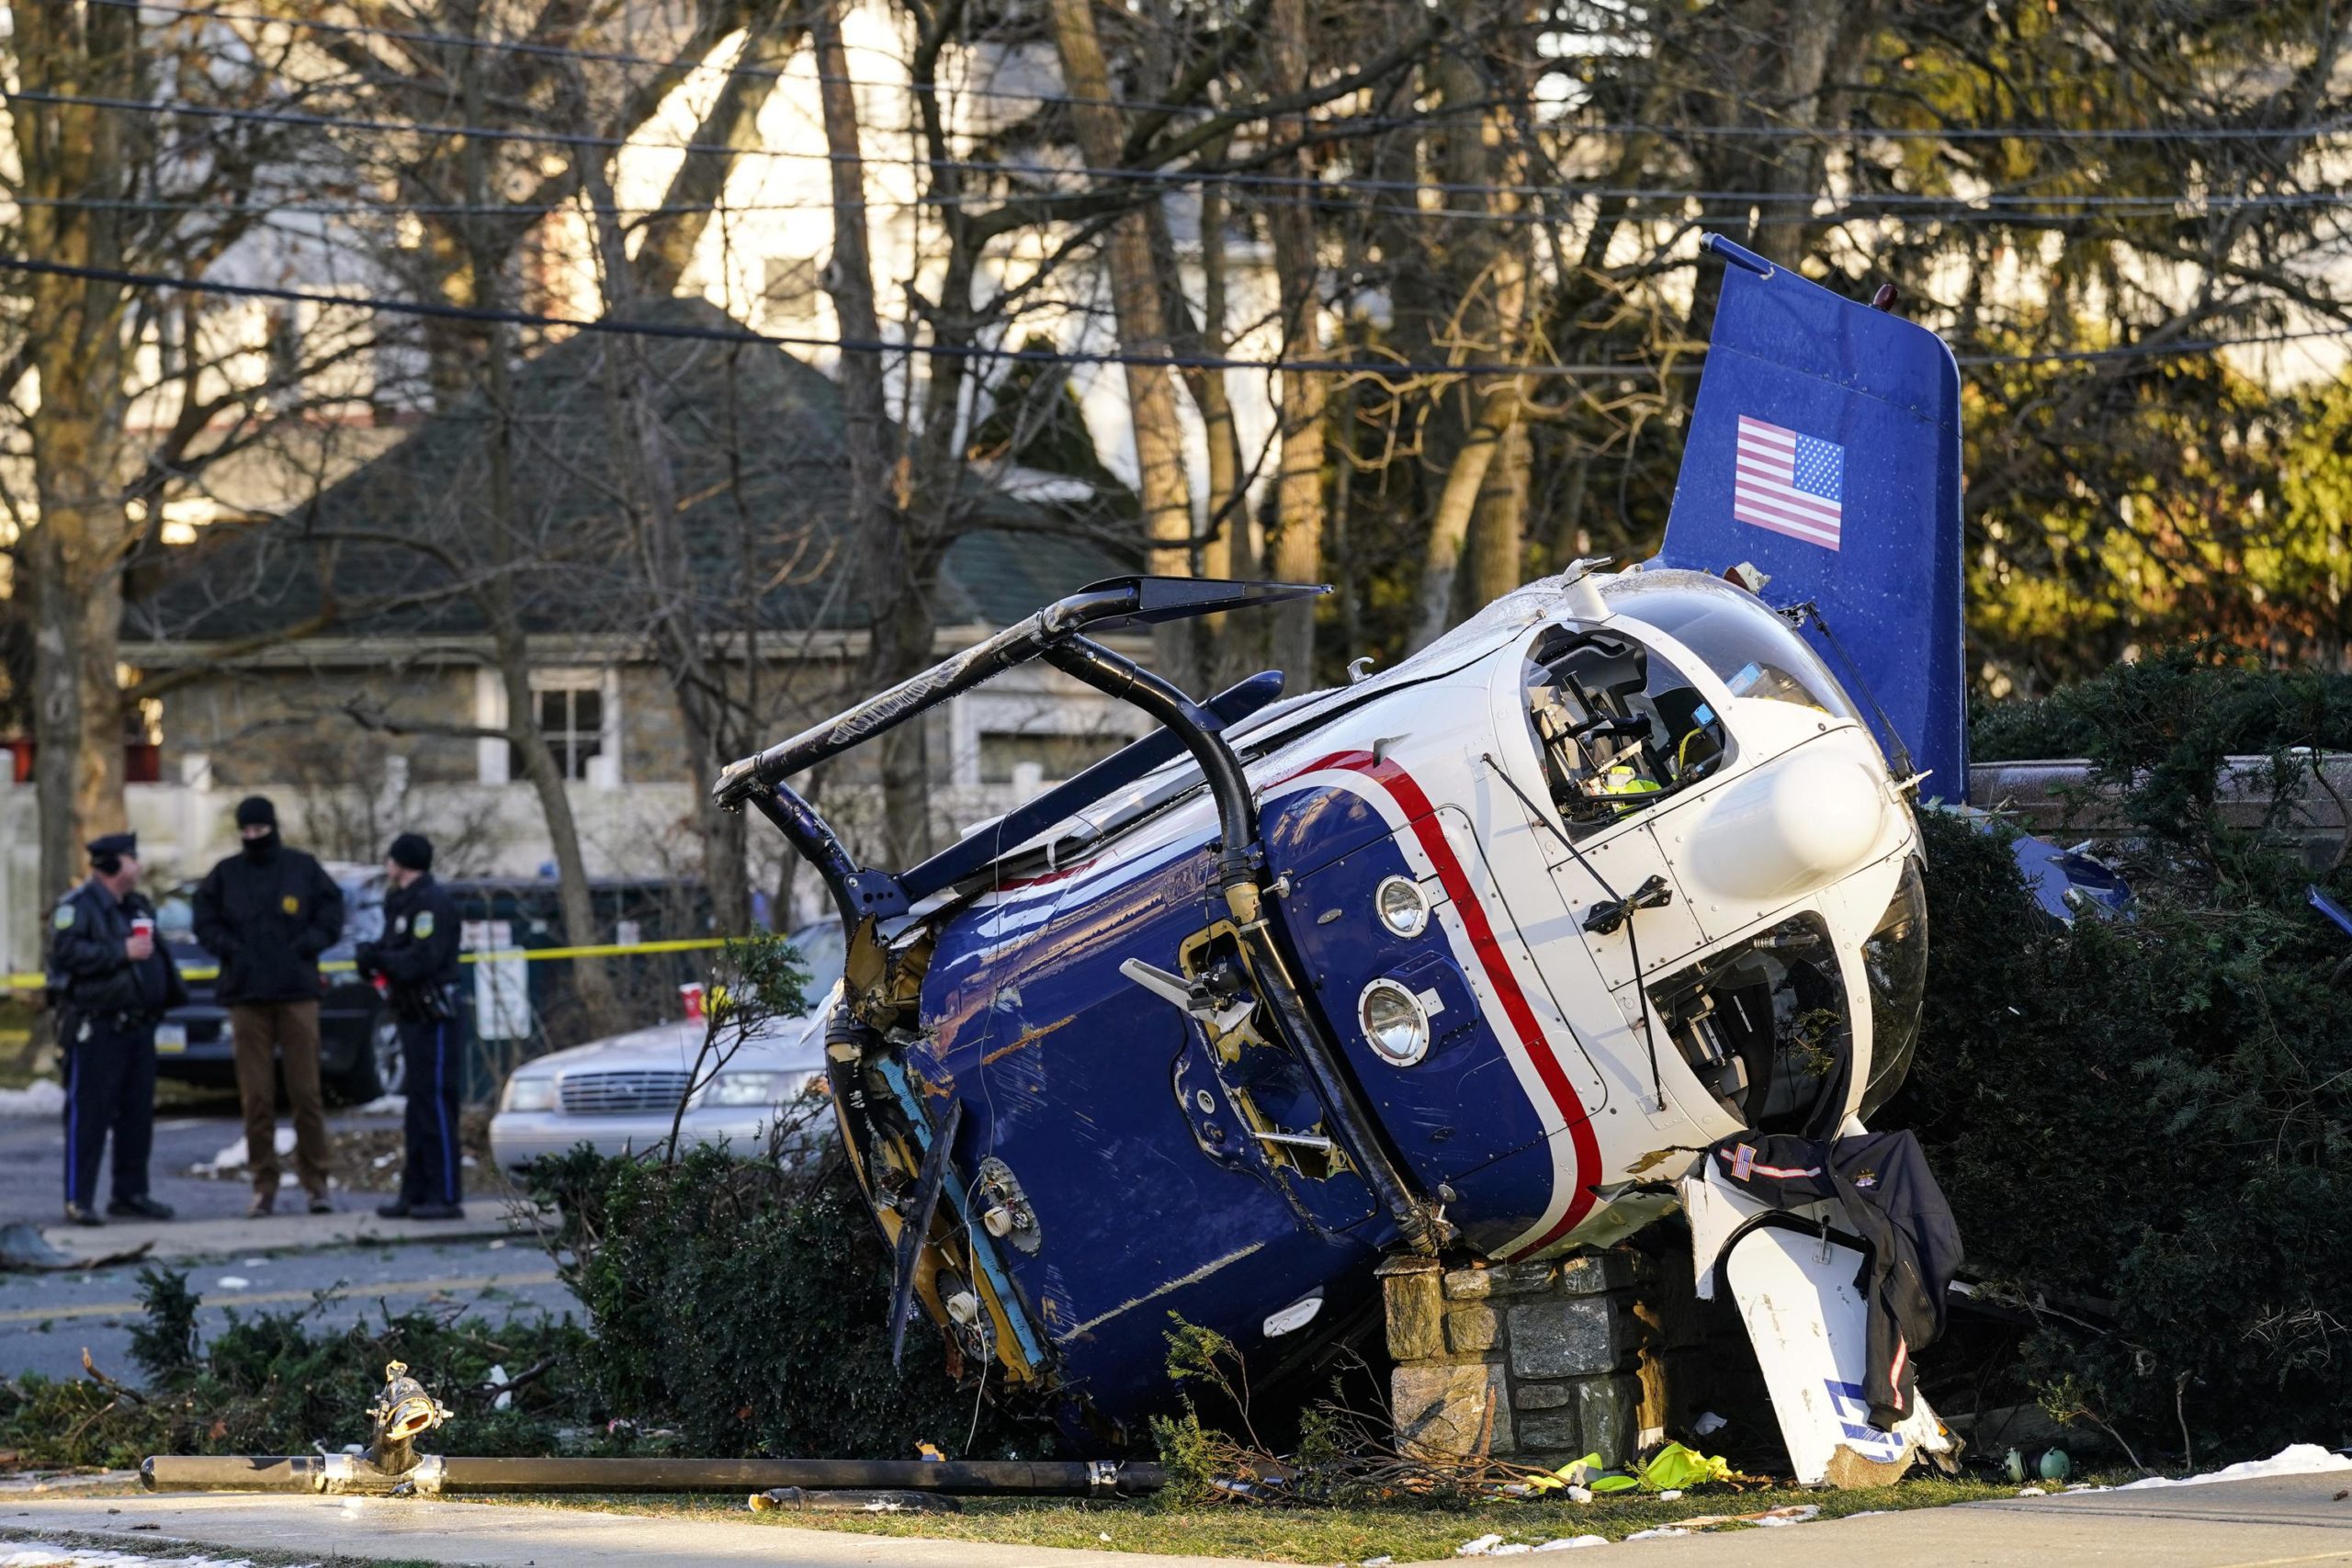 Medical Helicopter Crashes Near Church While Transporting Child